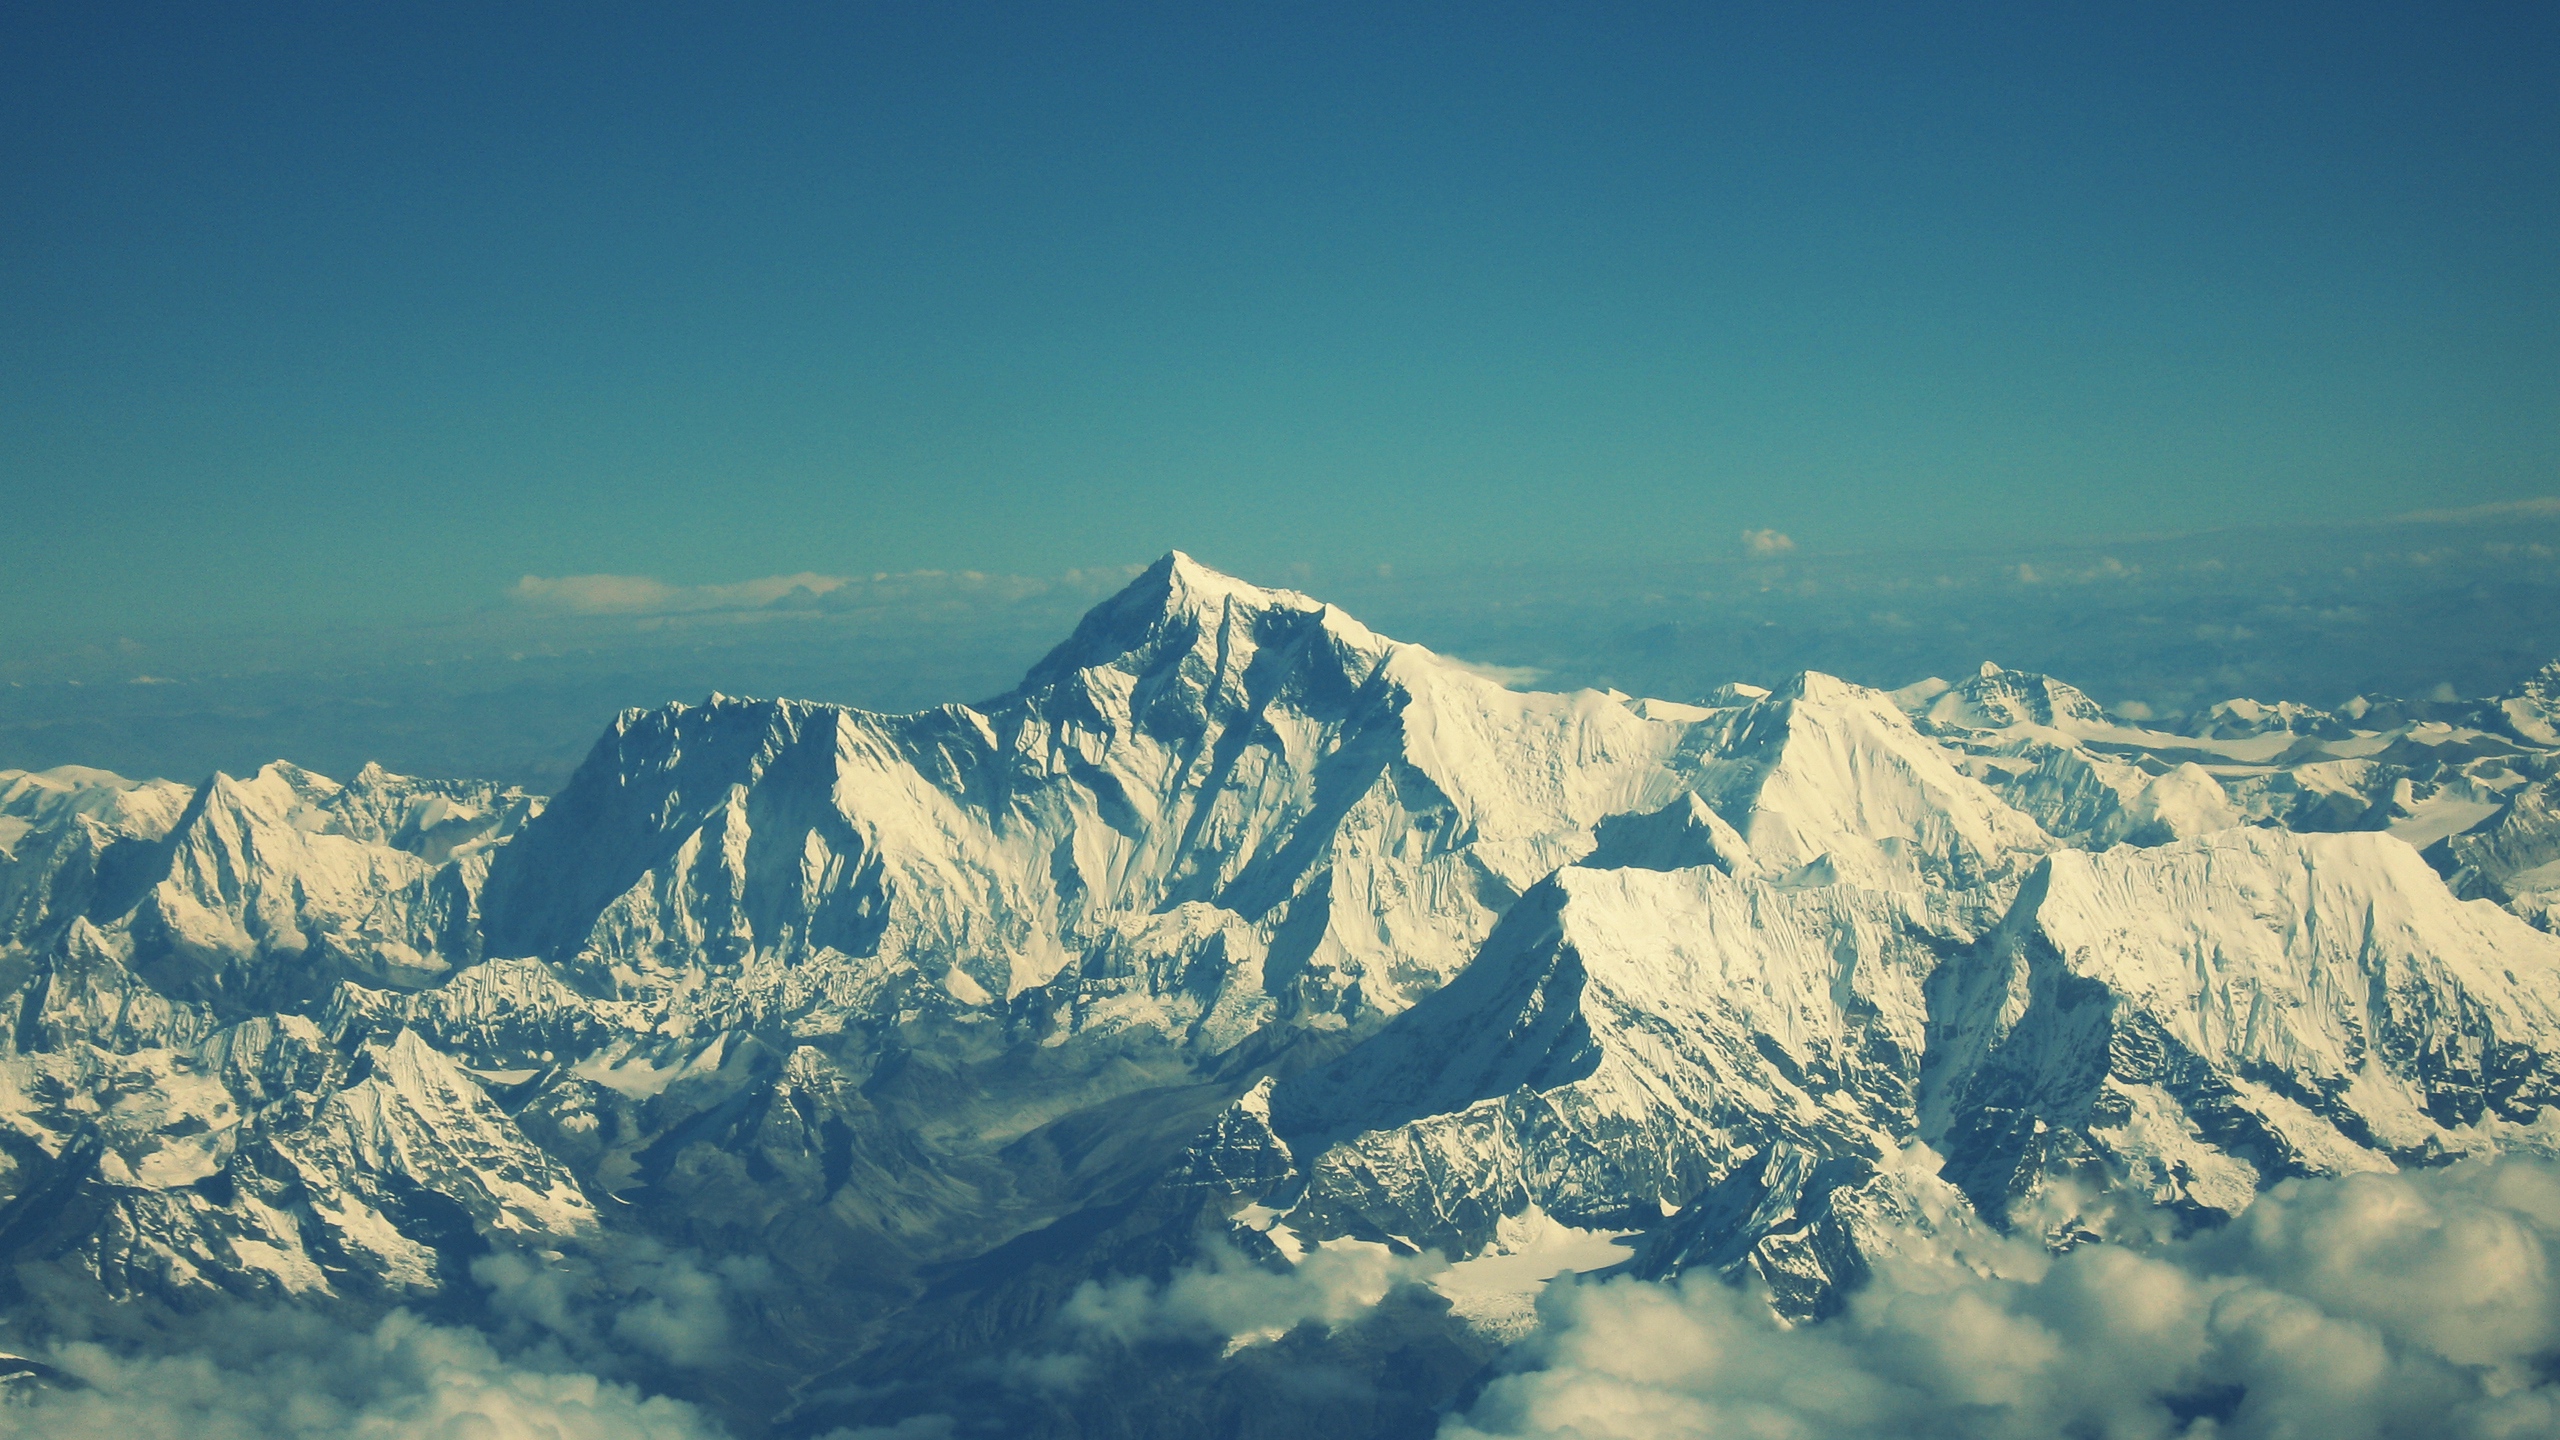 General 2560x1440 mountains Mount Everest sky clouds blue